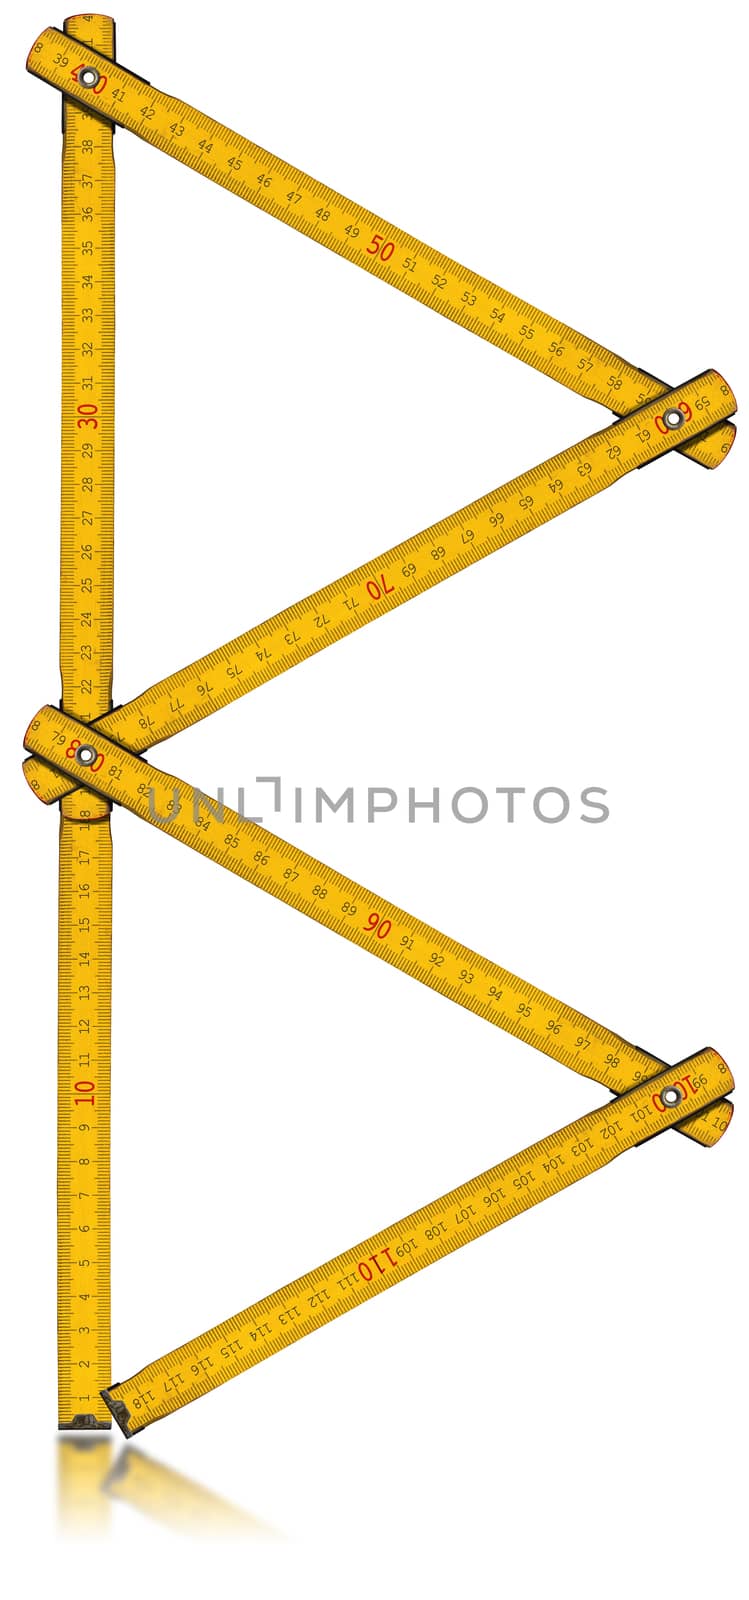 Font B - Old Yellow Meter Ruler by catalby